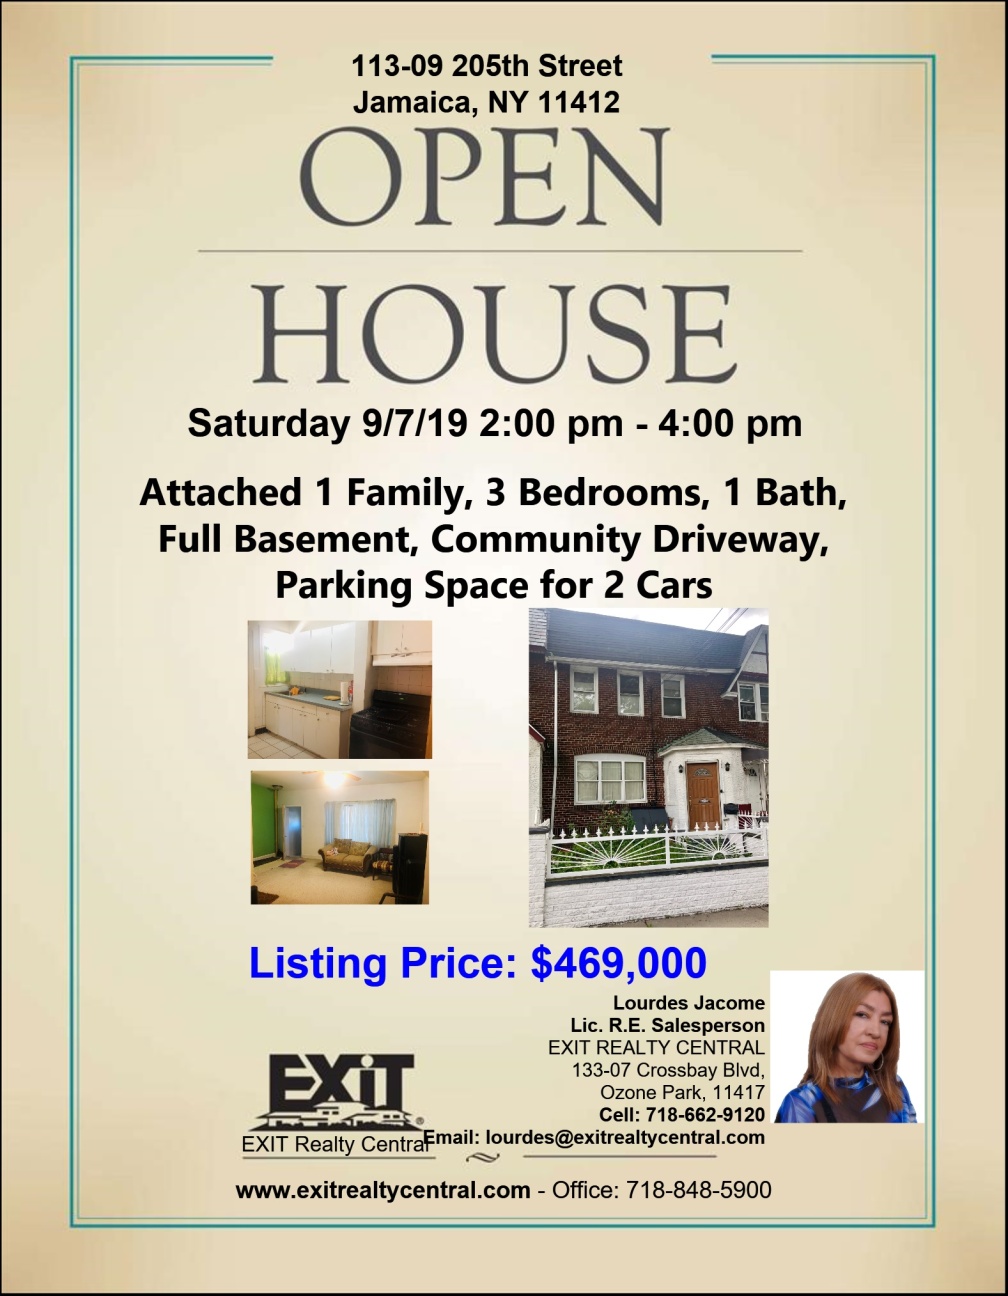 Open House in Jamaica 9/7 2pm-4pm